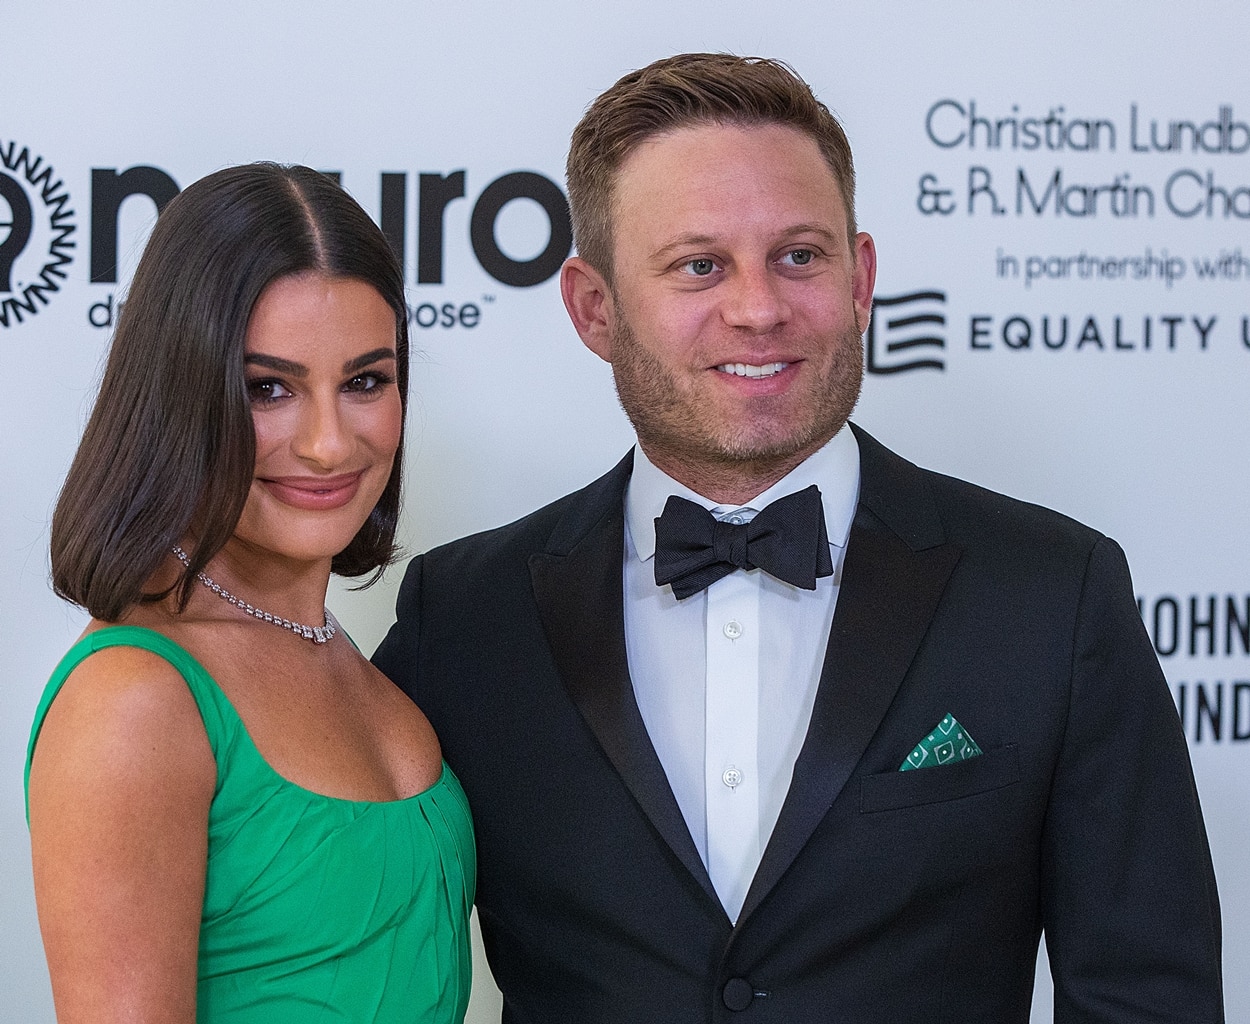 Lea Michele met her husband Zandy Reich at a wedding and they married in 2019